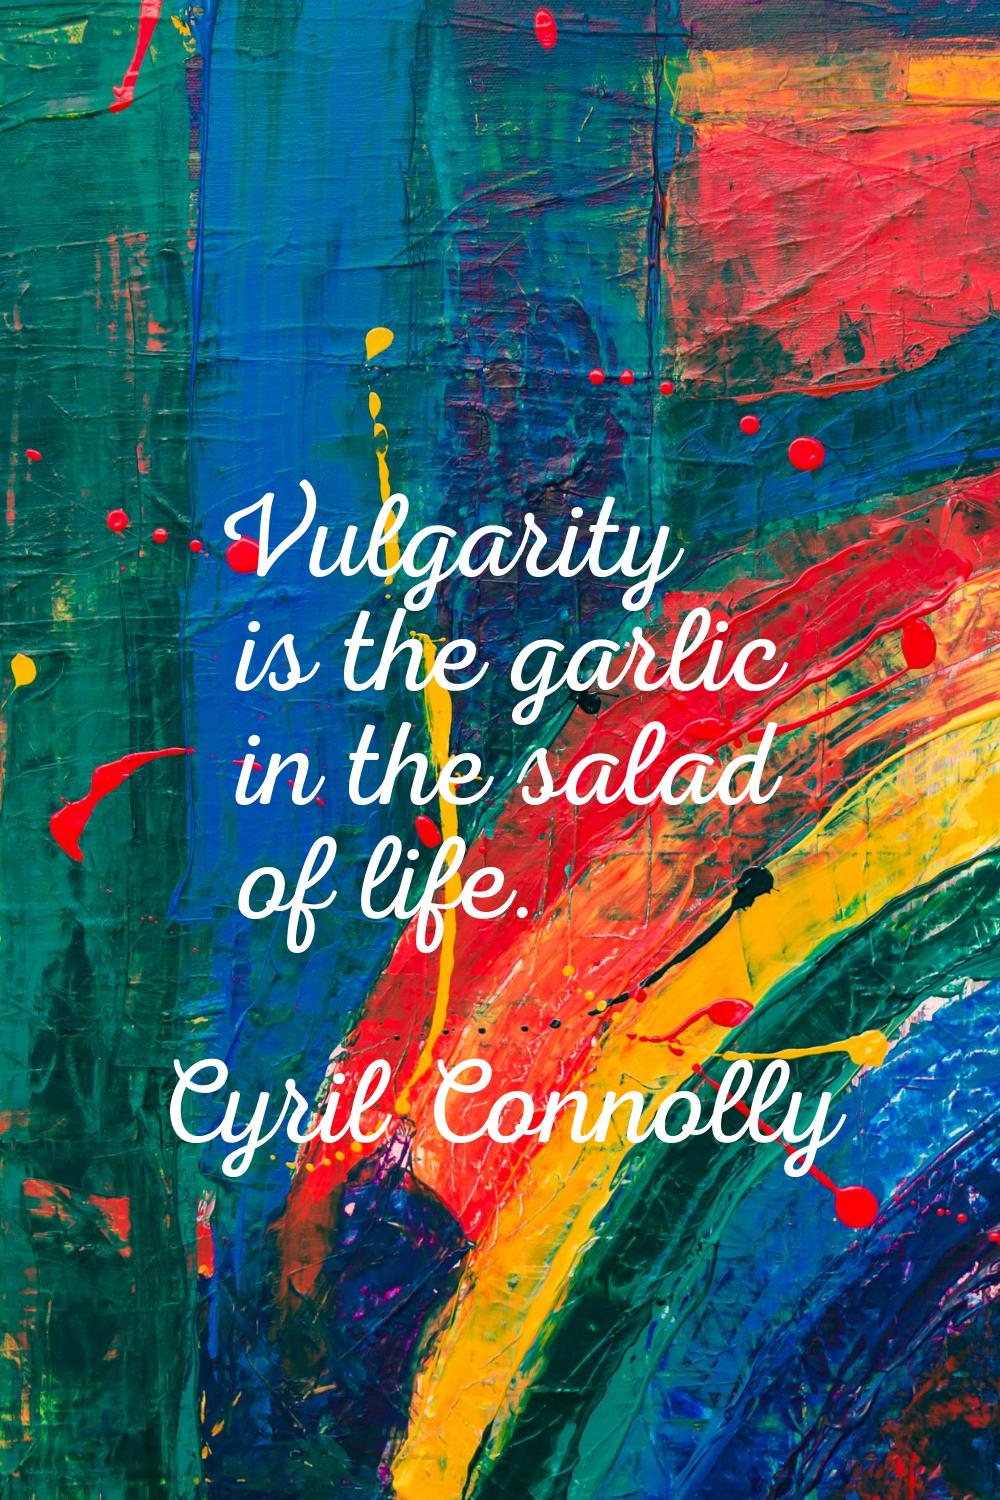 Vulgarity is the garlic in the salad of life.